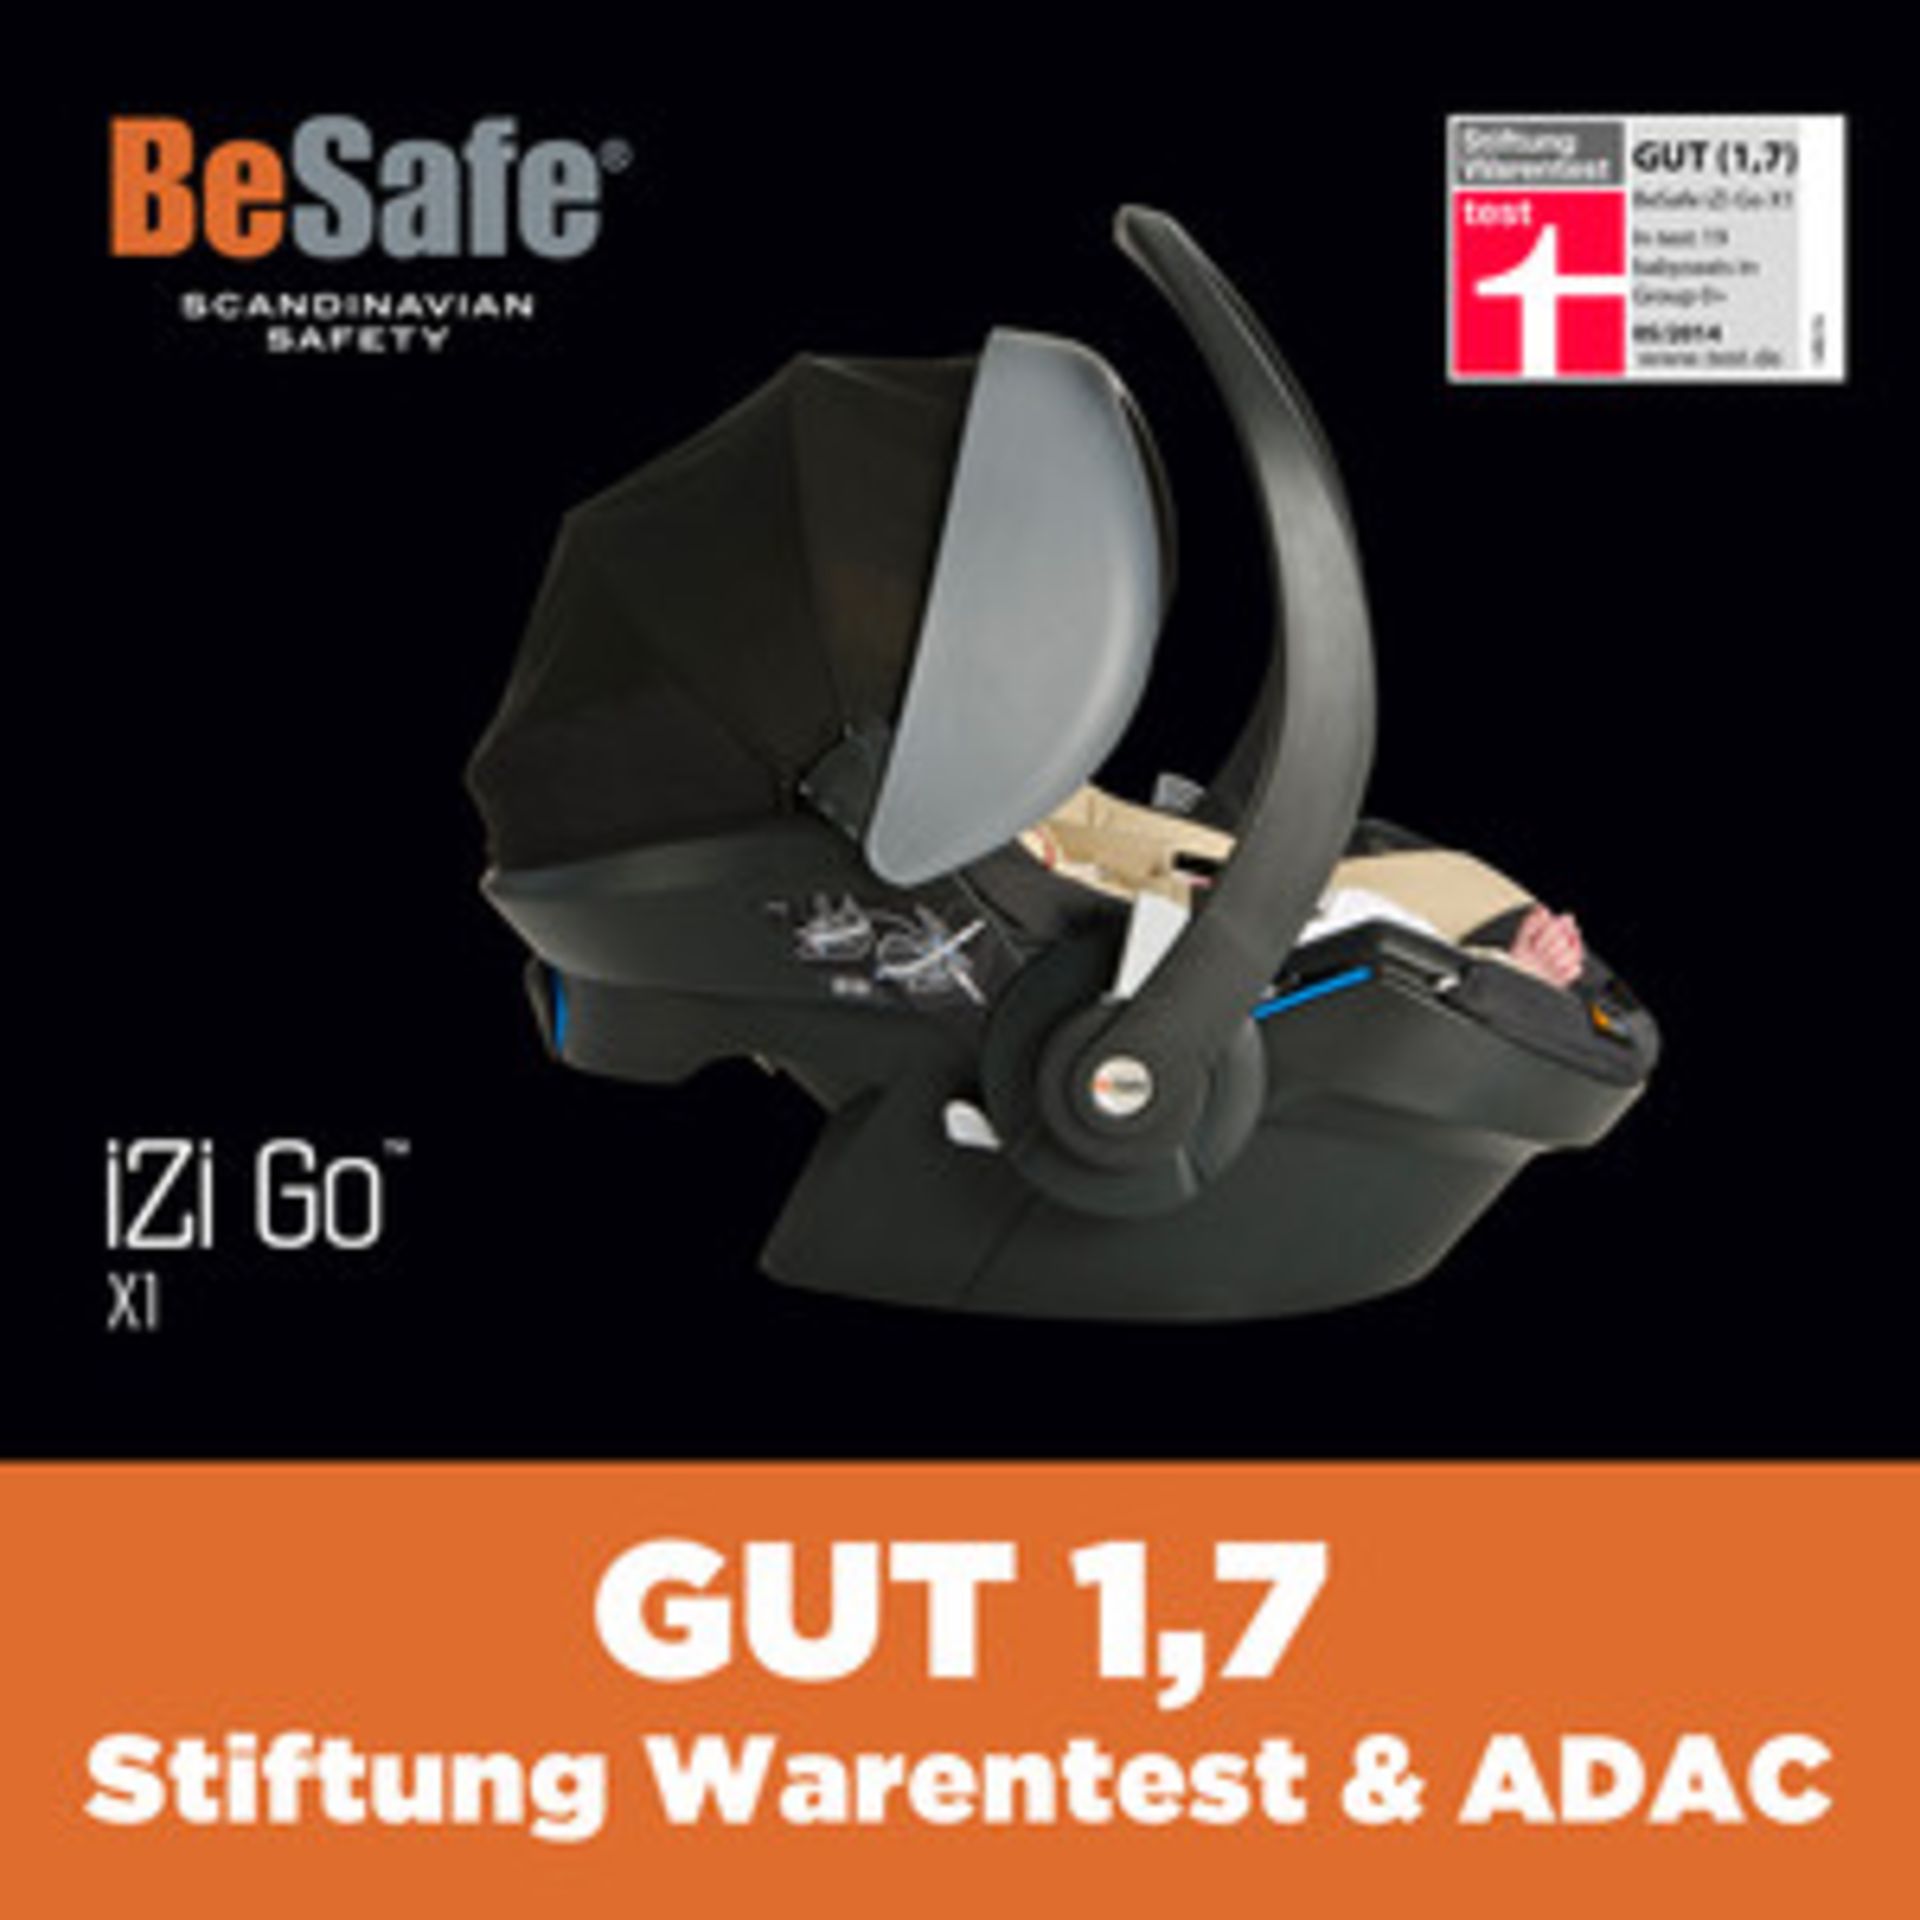 1 x BOXED BRAND NEW BE SAFE TRAVEL SYSTEM (19.6.15)  *PLEASE NOTE THAT THE BID PRICE IS MULTIPLIED